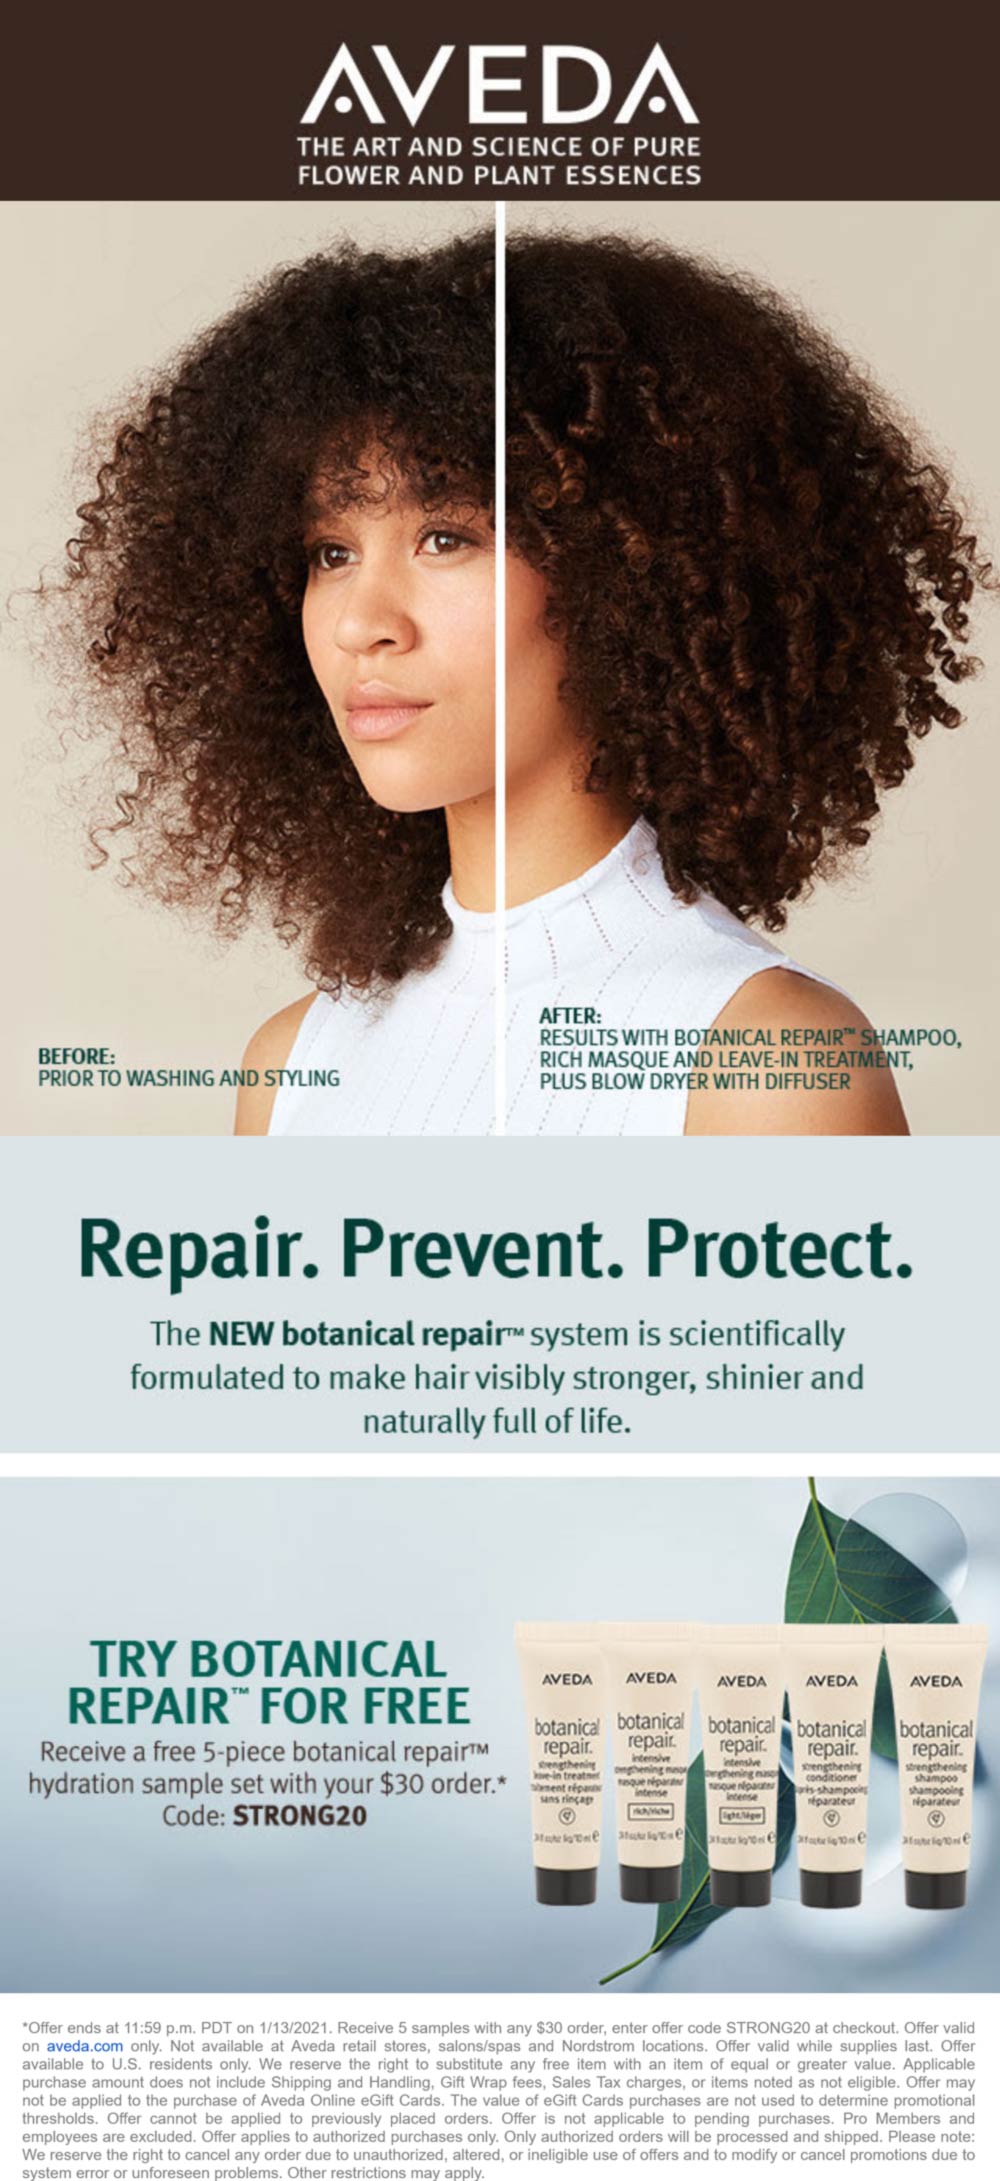 AVEDA stores Coupon  Free 5pc repair hydraton with $30 spent at AVEDA via promo code STRONG20 #aveda 